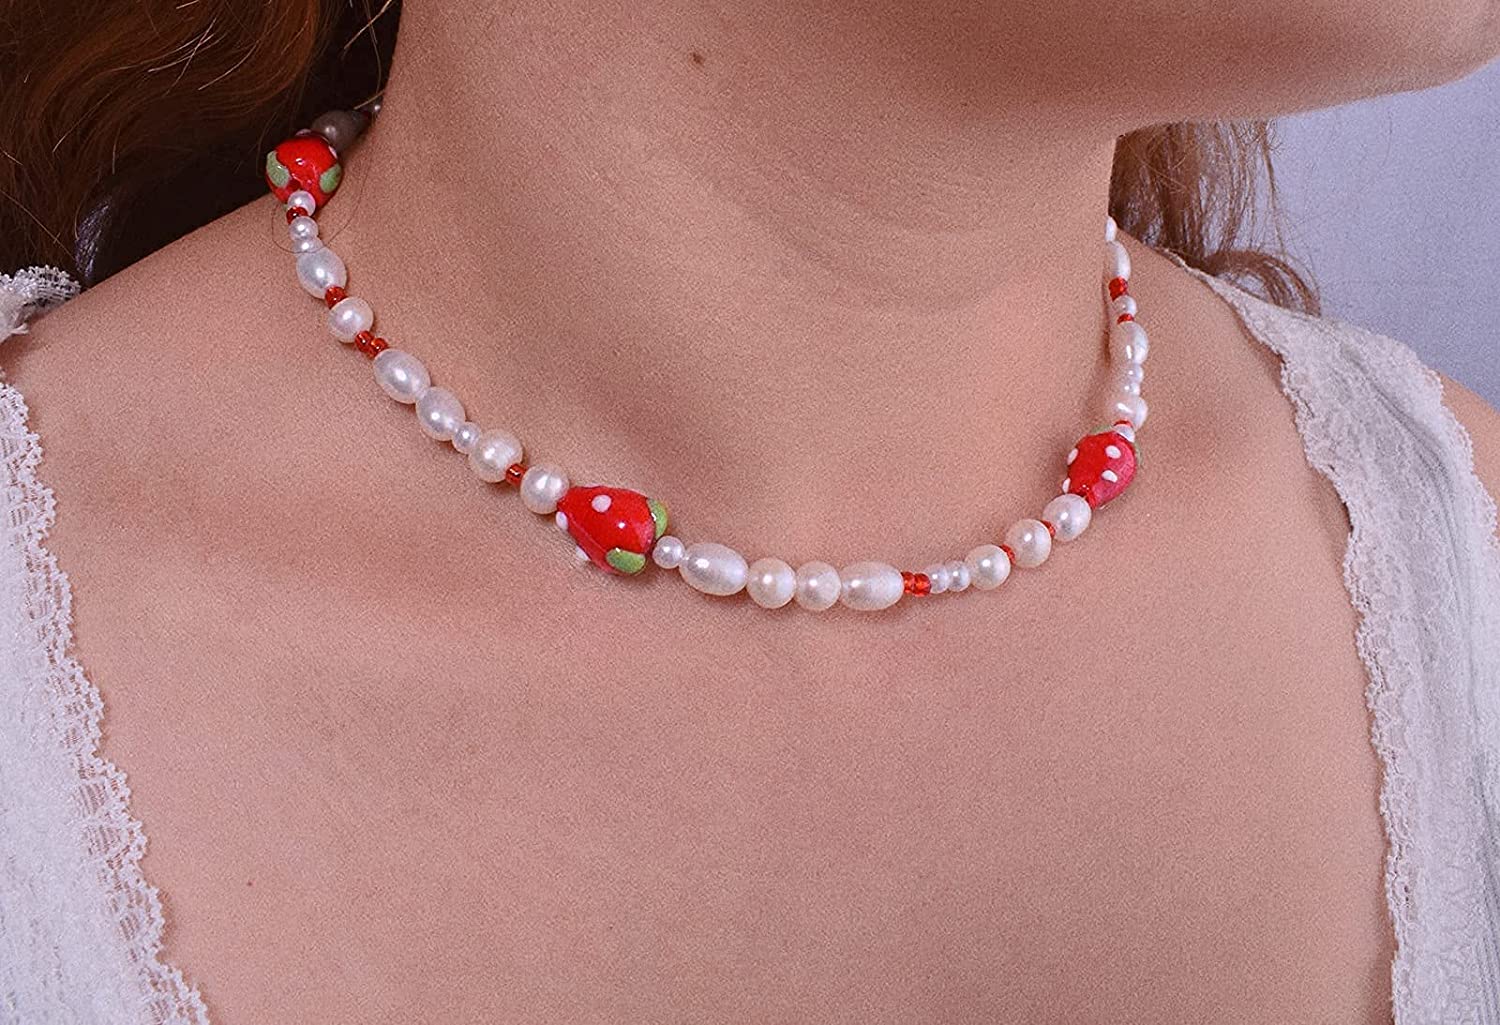 Y2K Natural Freshwater Pearl Beaded Necklace Choker “Fun Flirty” Summer Smiley Face Necklaces for Women Teen Girls Handmade Boho Jewelry